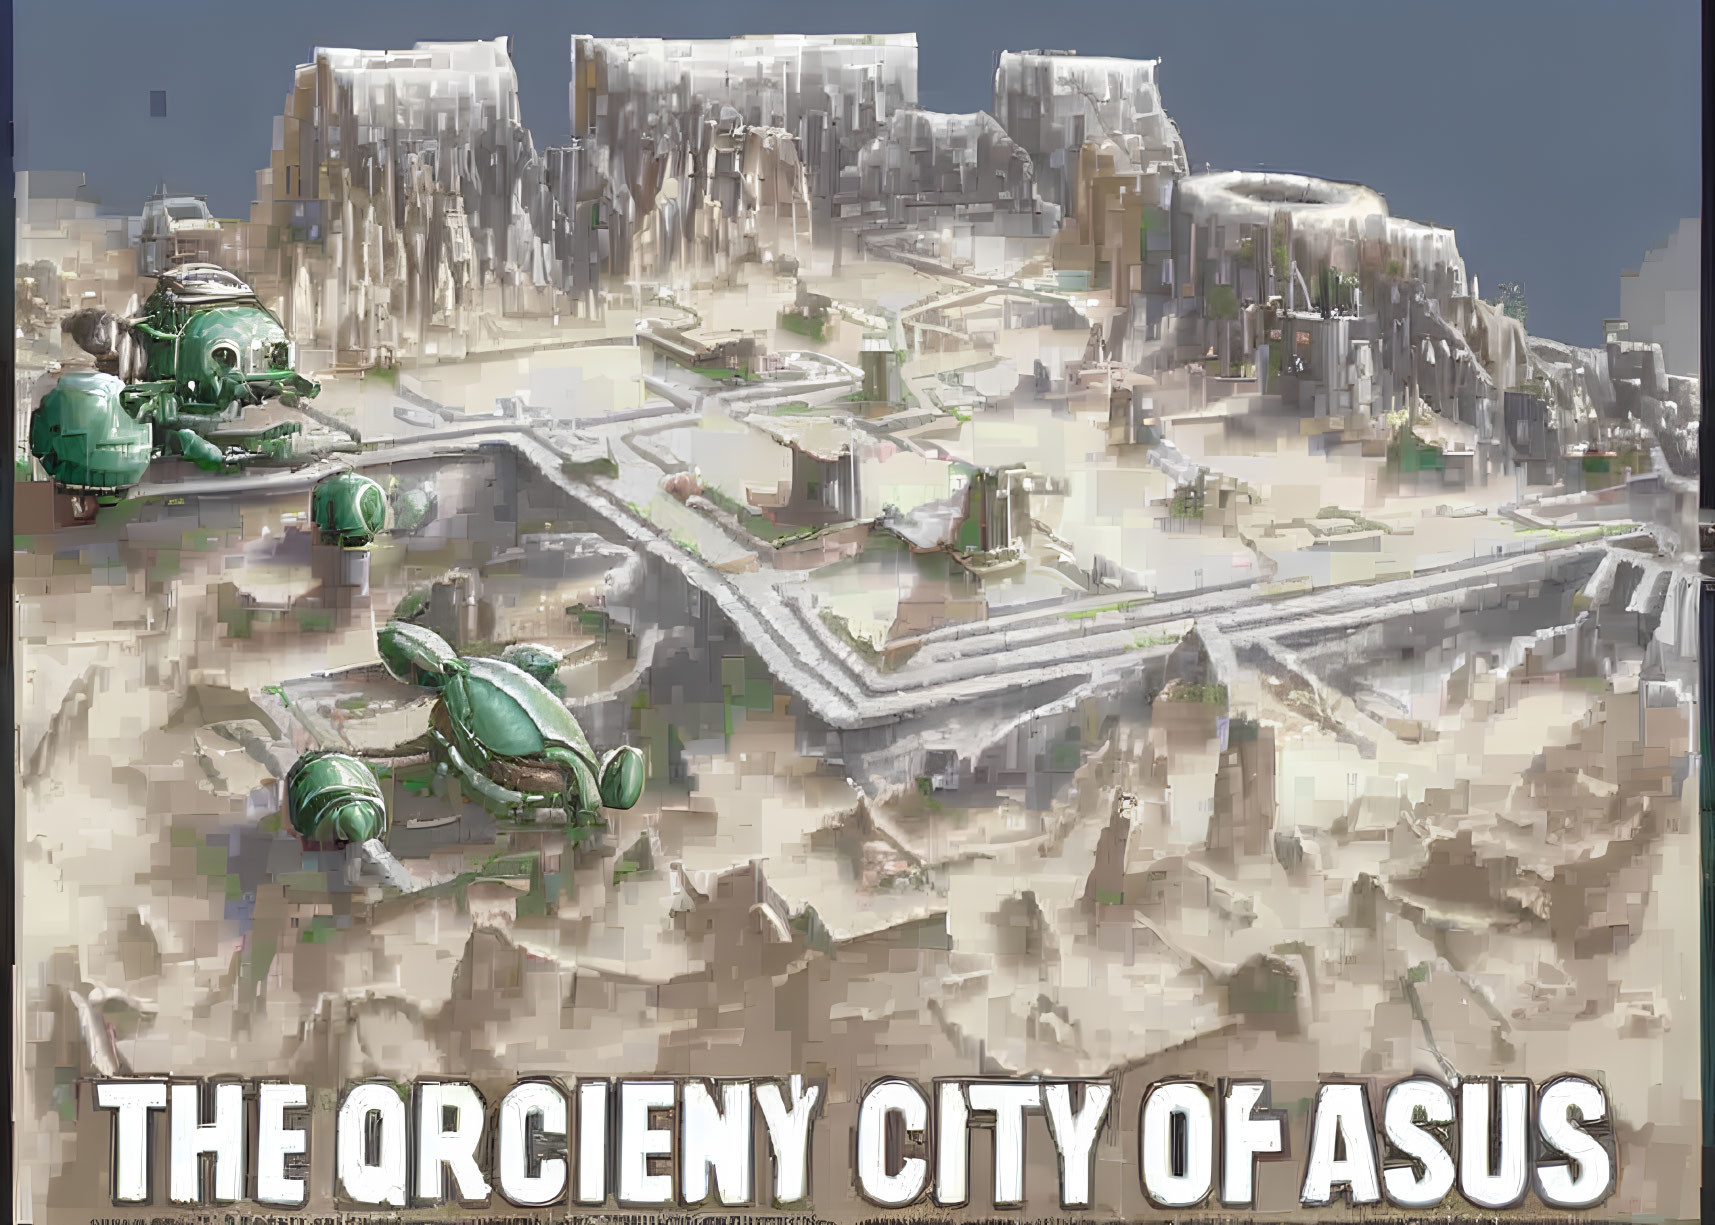 Fictional ancient city "ASUS" with turtle-like structures in desert